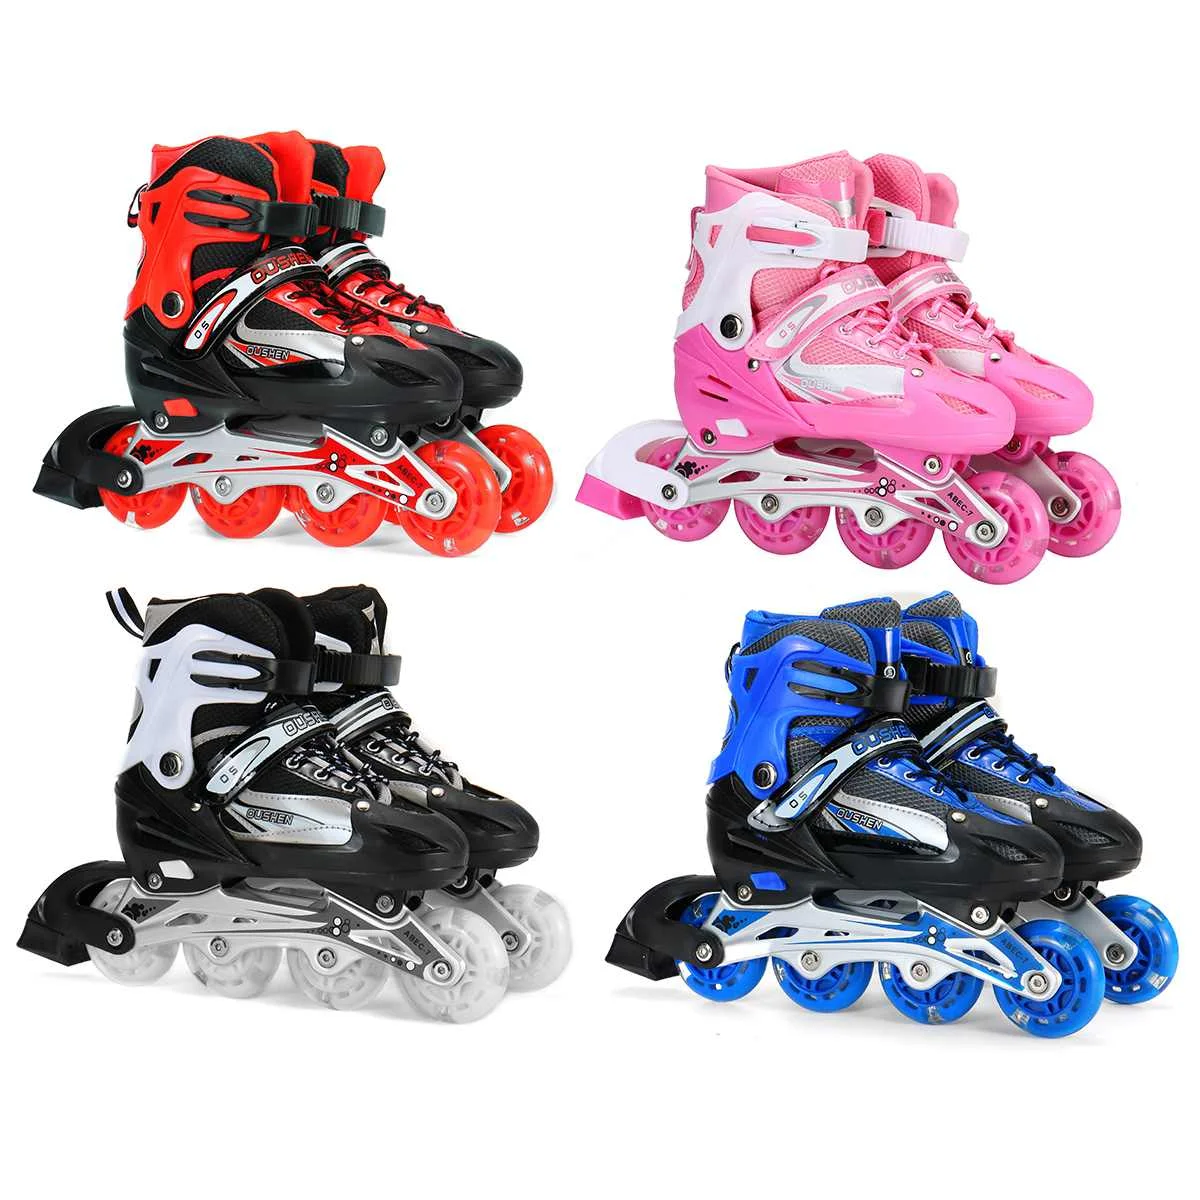 

Adjustable Illuminating Inline Skates with Light Up Wheels for Girls Boys Youth Inline Skates Outdoor Sports Roller Skates Shoes